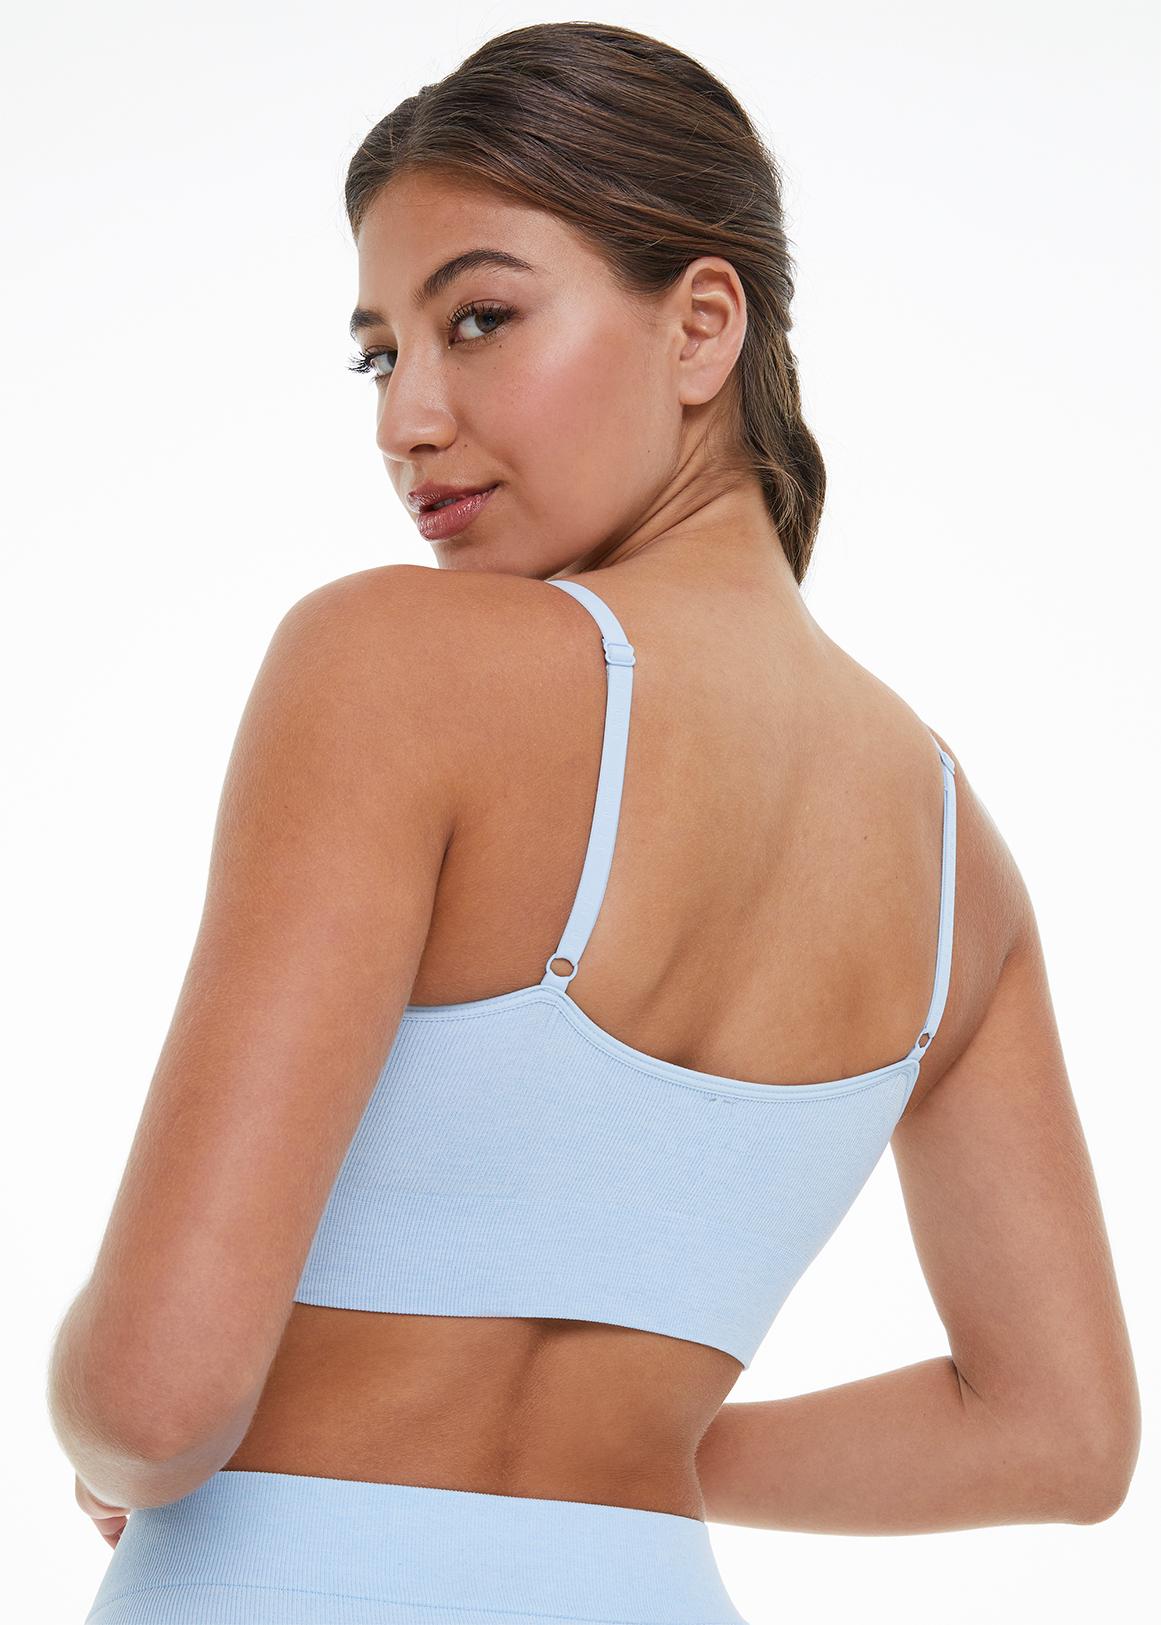 Down Girls — Padded Sports Bra (a MUST for the Girls) — The Butcher Shop  Girl